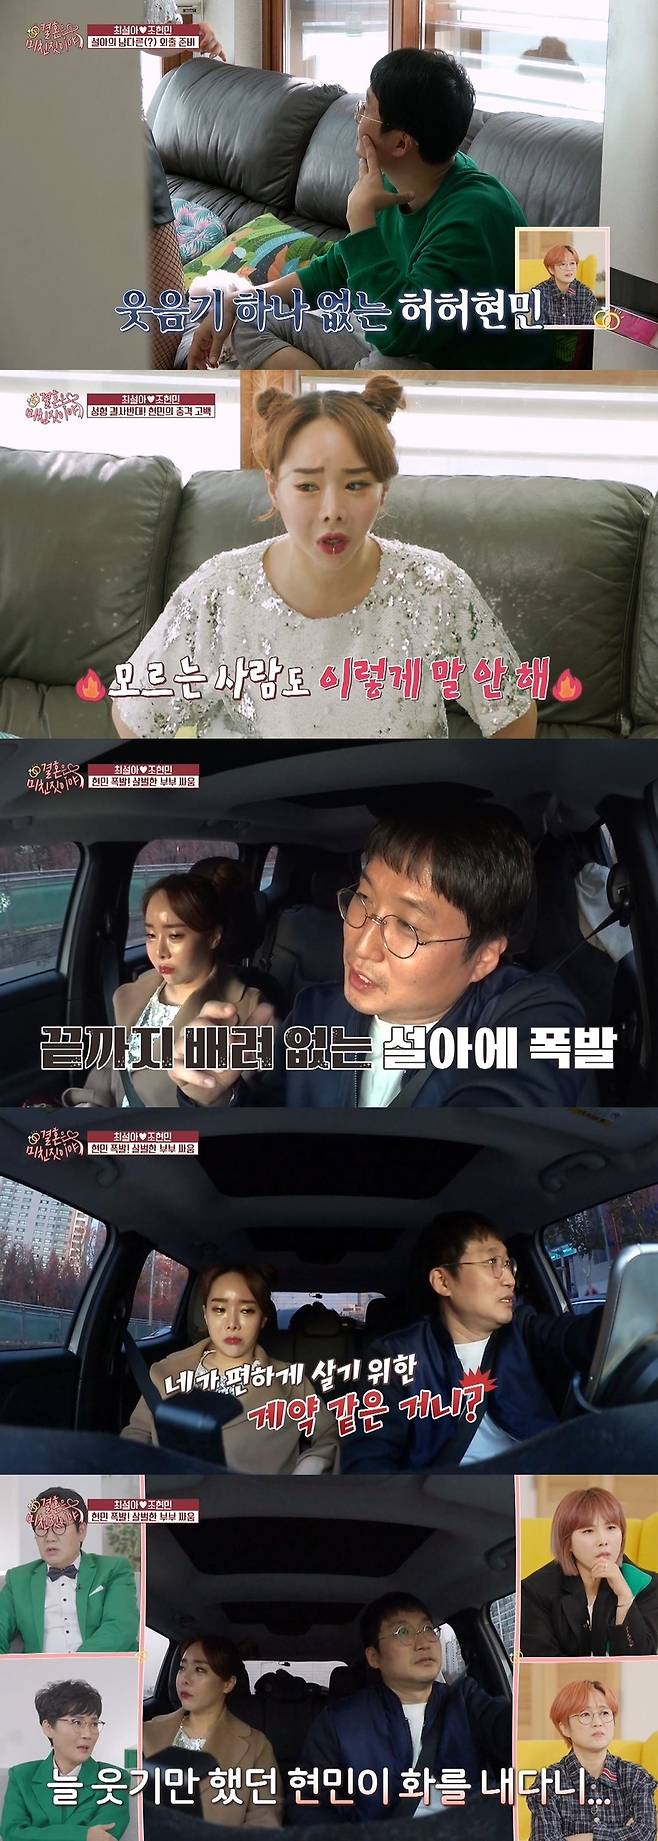 There was a high voice between the comedian Emily Lee Cho and Choi Seol-a.In the 7th episode of IHQ Marriage is crazy broadcasted on December 17, Pang Hyun Sook and Choi Yang-rak met with Lim Mi-sook for consultation.Choi, who married Emily Lee Cho after five years of secret love, is a comedian couple who has a daughter and is married for seven years.On the weekend morning, my daughter woke up to Choi, saying, Sister wake up. Everyone was surprised by the title of her sister, not her mother.Everyone was embarrassed by the title of a drama like a drama that was twisted by a genealogy. Choi said, I saw my daughter and Elsa, and suddenly I saw it and said, Would you like to make a snowman with me?I was not bad (I just left it). So, relieved, Shin Bong-sun laughed, saying, If I did not tell you this, I would have seen it as a stone + I. Emily Lee Cho could not hide the smile of the extension when she saw Choi, who has been maintaining high tension since morning.When Pang Hyun-sook envied that he was loving, Choi said, I have a lot of laughter, but I love it when I see it. I still love it.Emily Lee Cho also sharply solidified her face in the story of Chois calf treatment.Im going to get a shot that will let my calf muscles melt and slim, saying my boots are not locked. Emily Lee Cho said, Why are you doing that?I did not ask you to do it once. In an interview with the production team, Emily Lee Cho said, I am in favor of voting for the pros and cons of molding, but my face keeps changing.In addition to double eyelids and nose surgery, Choi confessed, It is not mine except for the cornea.Emily Lee Cho said, You do not know because you change a little bit. There is no face of Choi Seol-ah that I liked now.So I hate it, he said, expressing his upset.When Emily Lee Cho said, I hear artificial human sounds, Choi said, I did not know that I would hear this from my family.I do not know anyone who does not know that. 